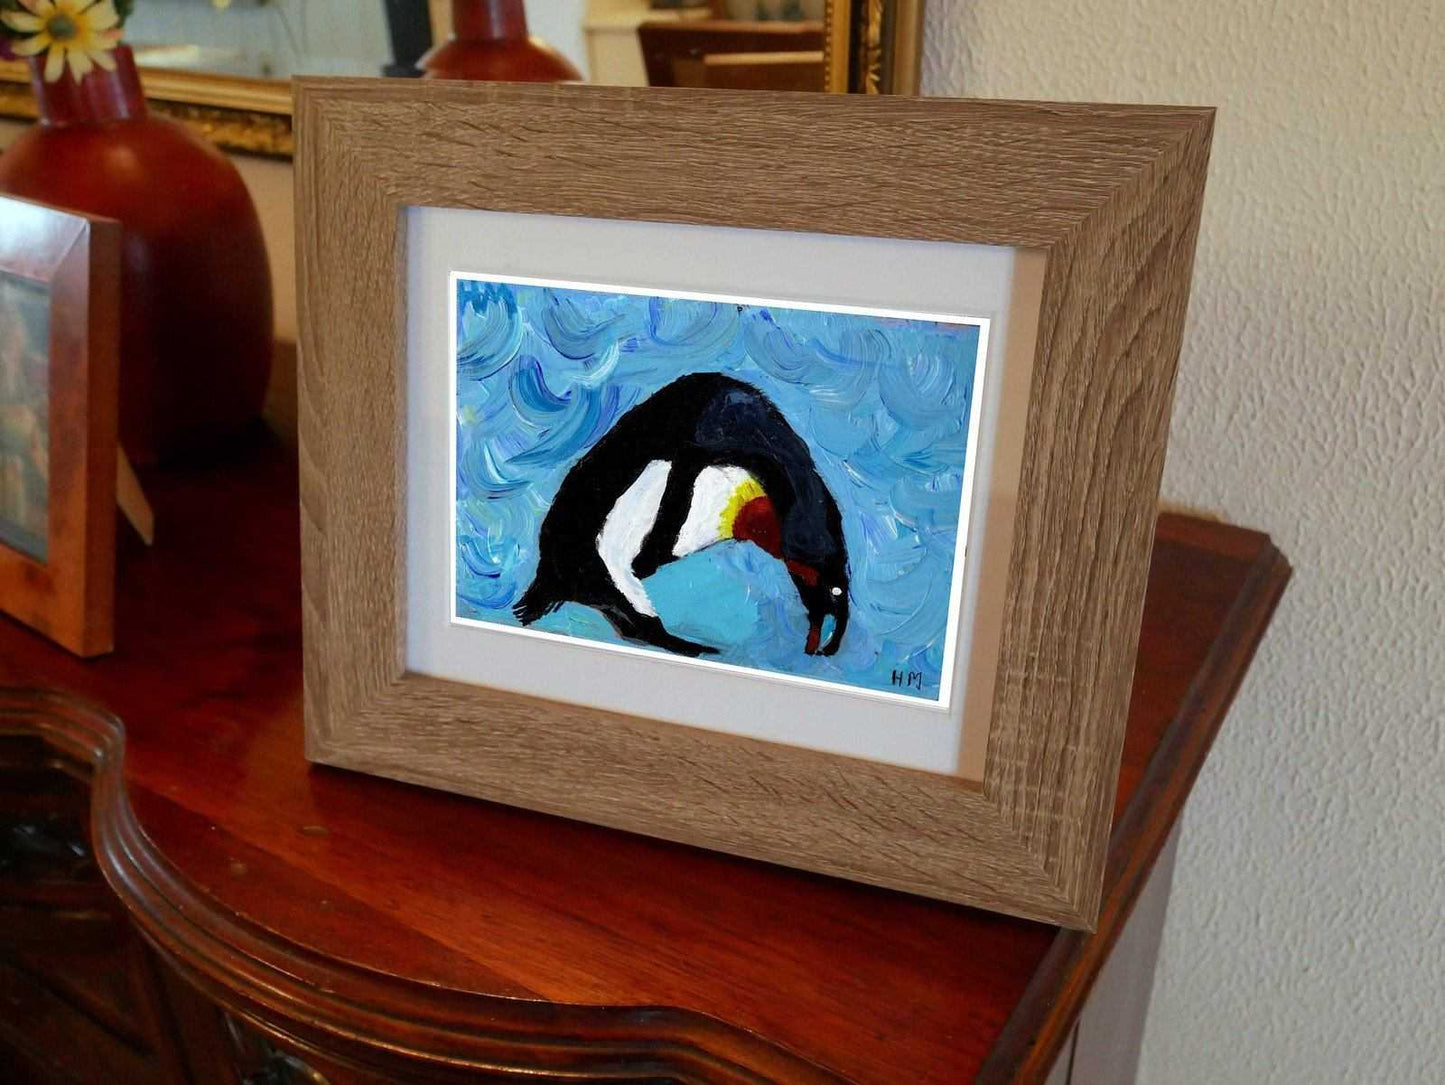 Penguin painting done by young artist Holly Mansfield Numbered limited edition Giclee on Archival Matte paper ArtbyMyleslaurence